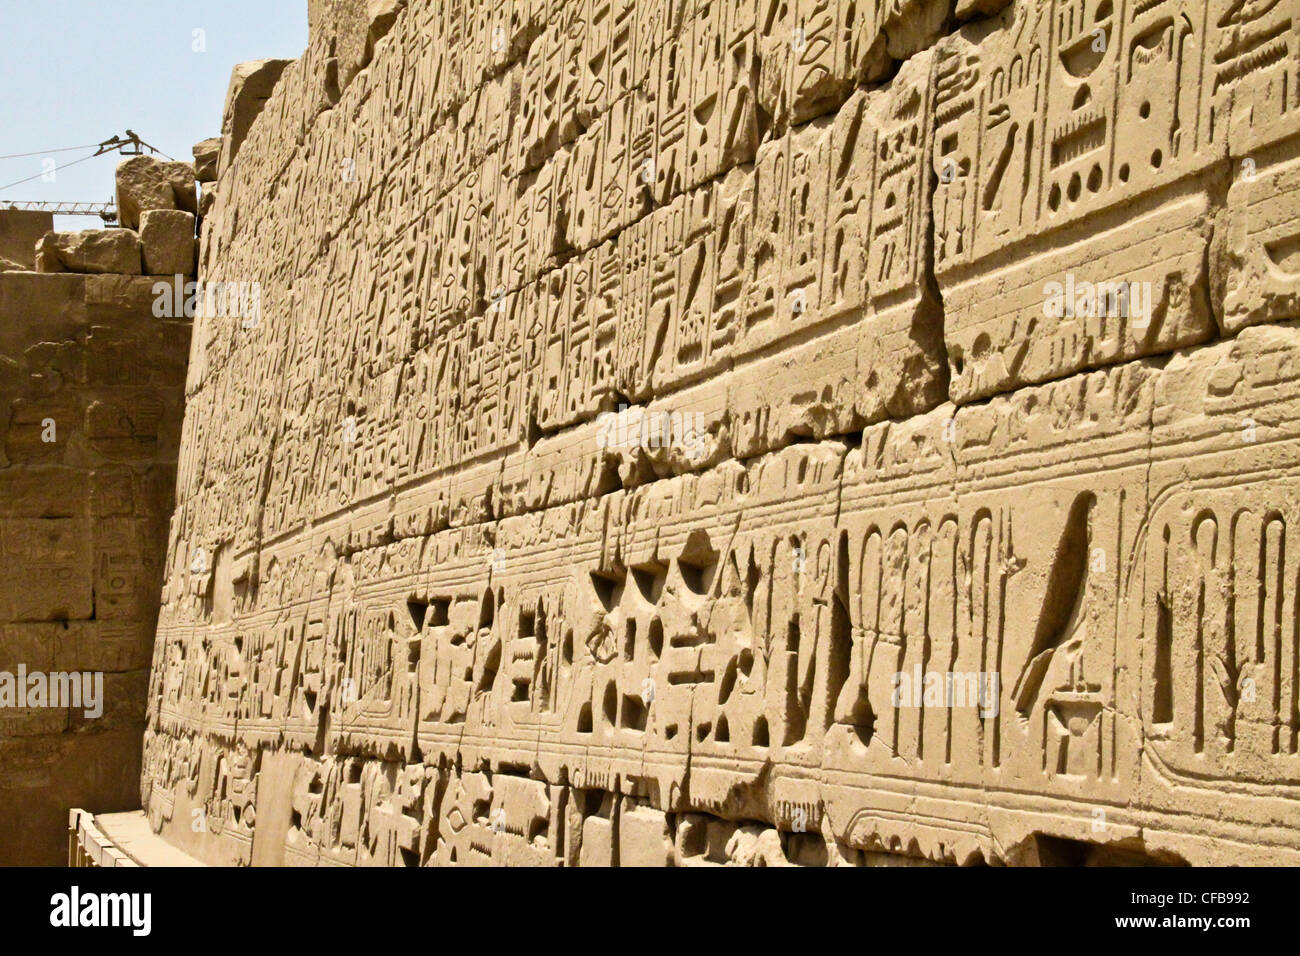 Hieroglyphics in bas-relief of the great temple of Karnak dedicated to the worship of Amun, in the city of Luxor in Egypt Stock Photo